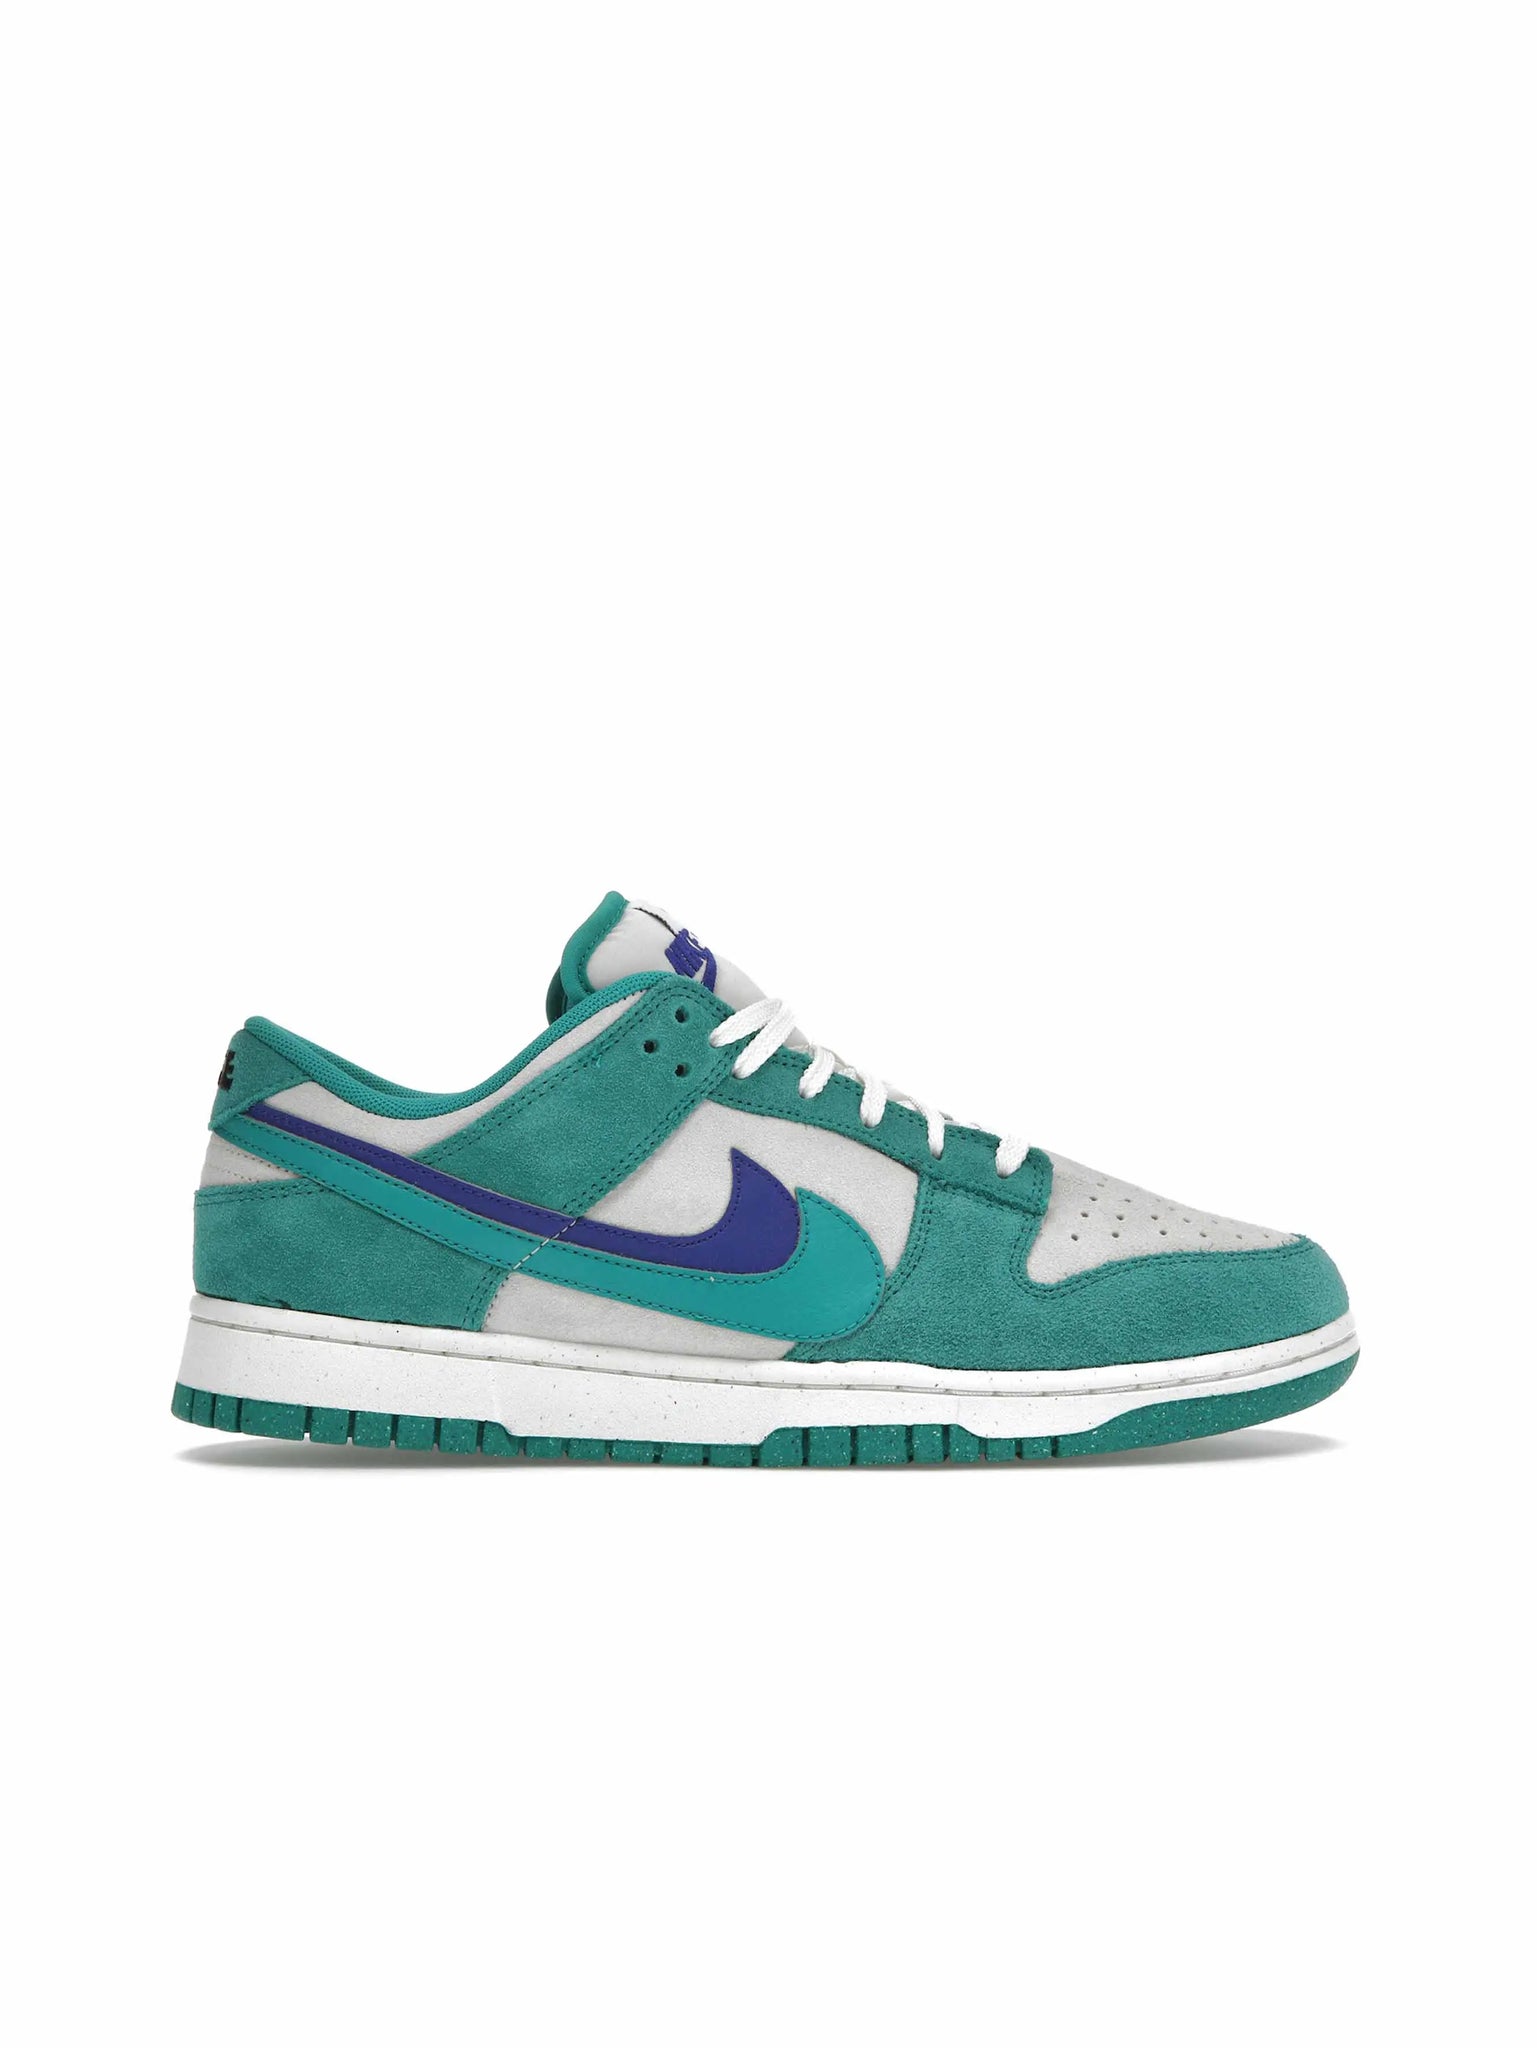 Nike Dunk Low SE 85 Neptune Green (W) - Prior